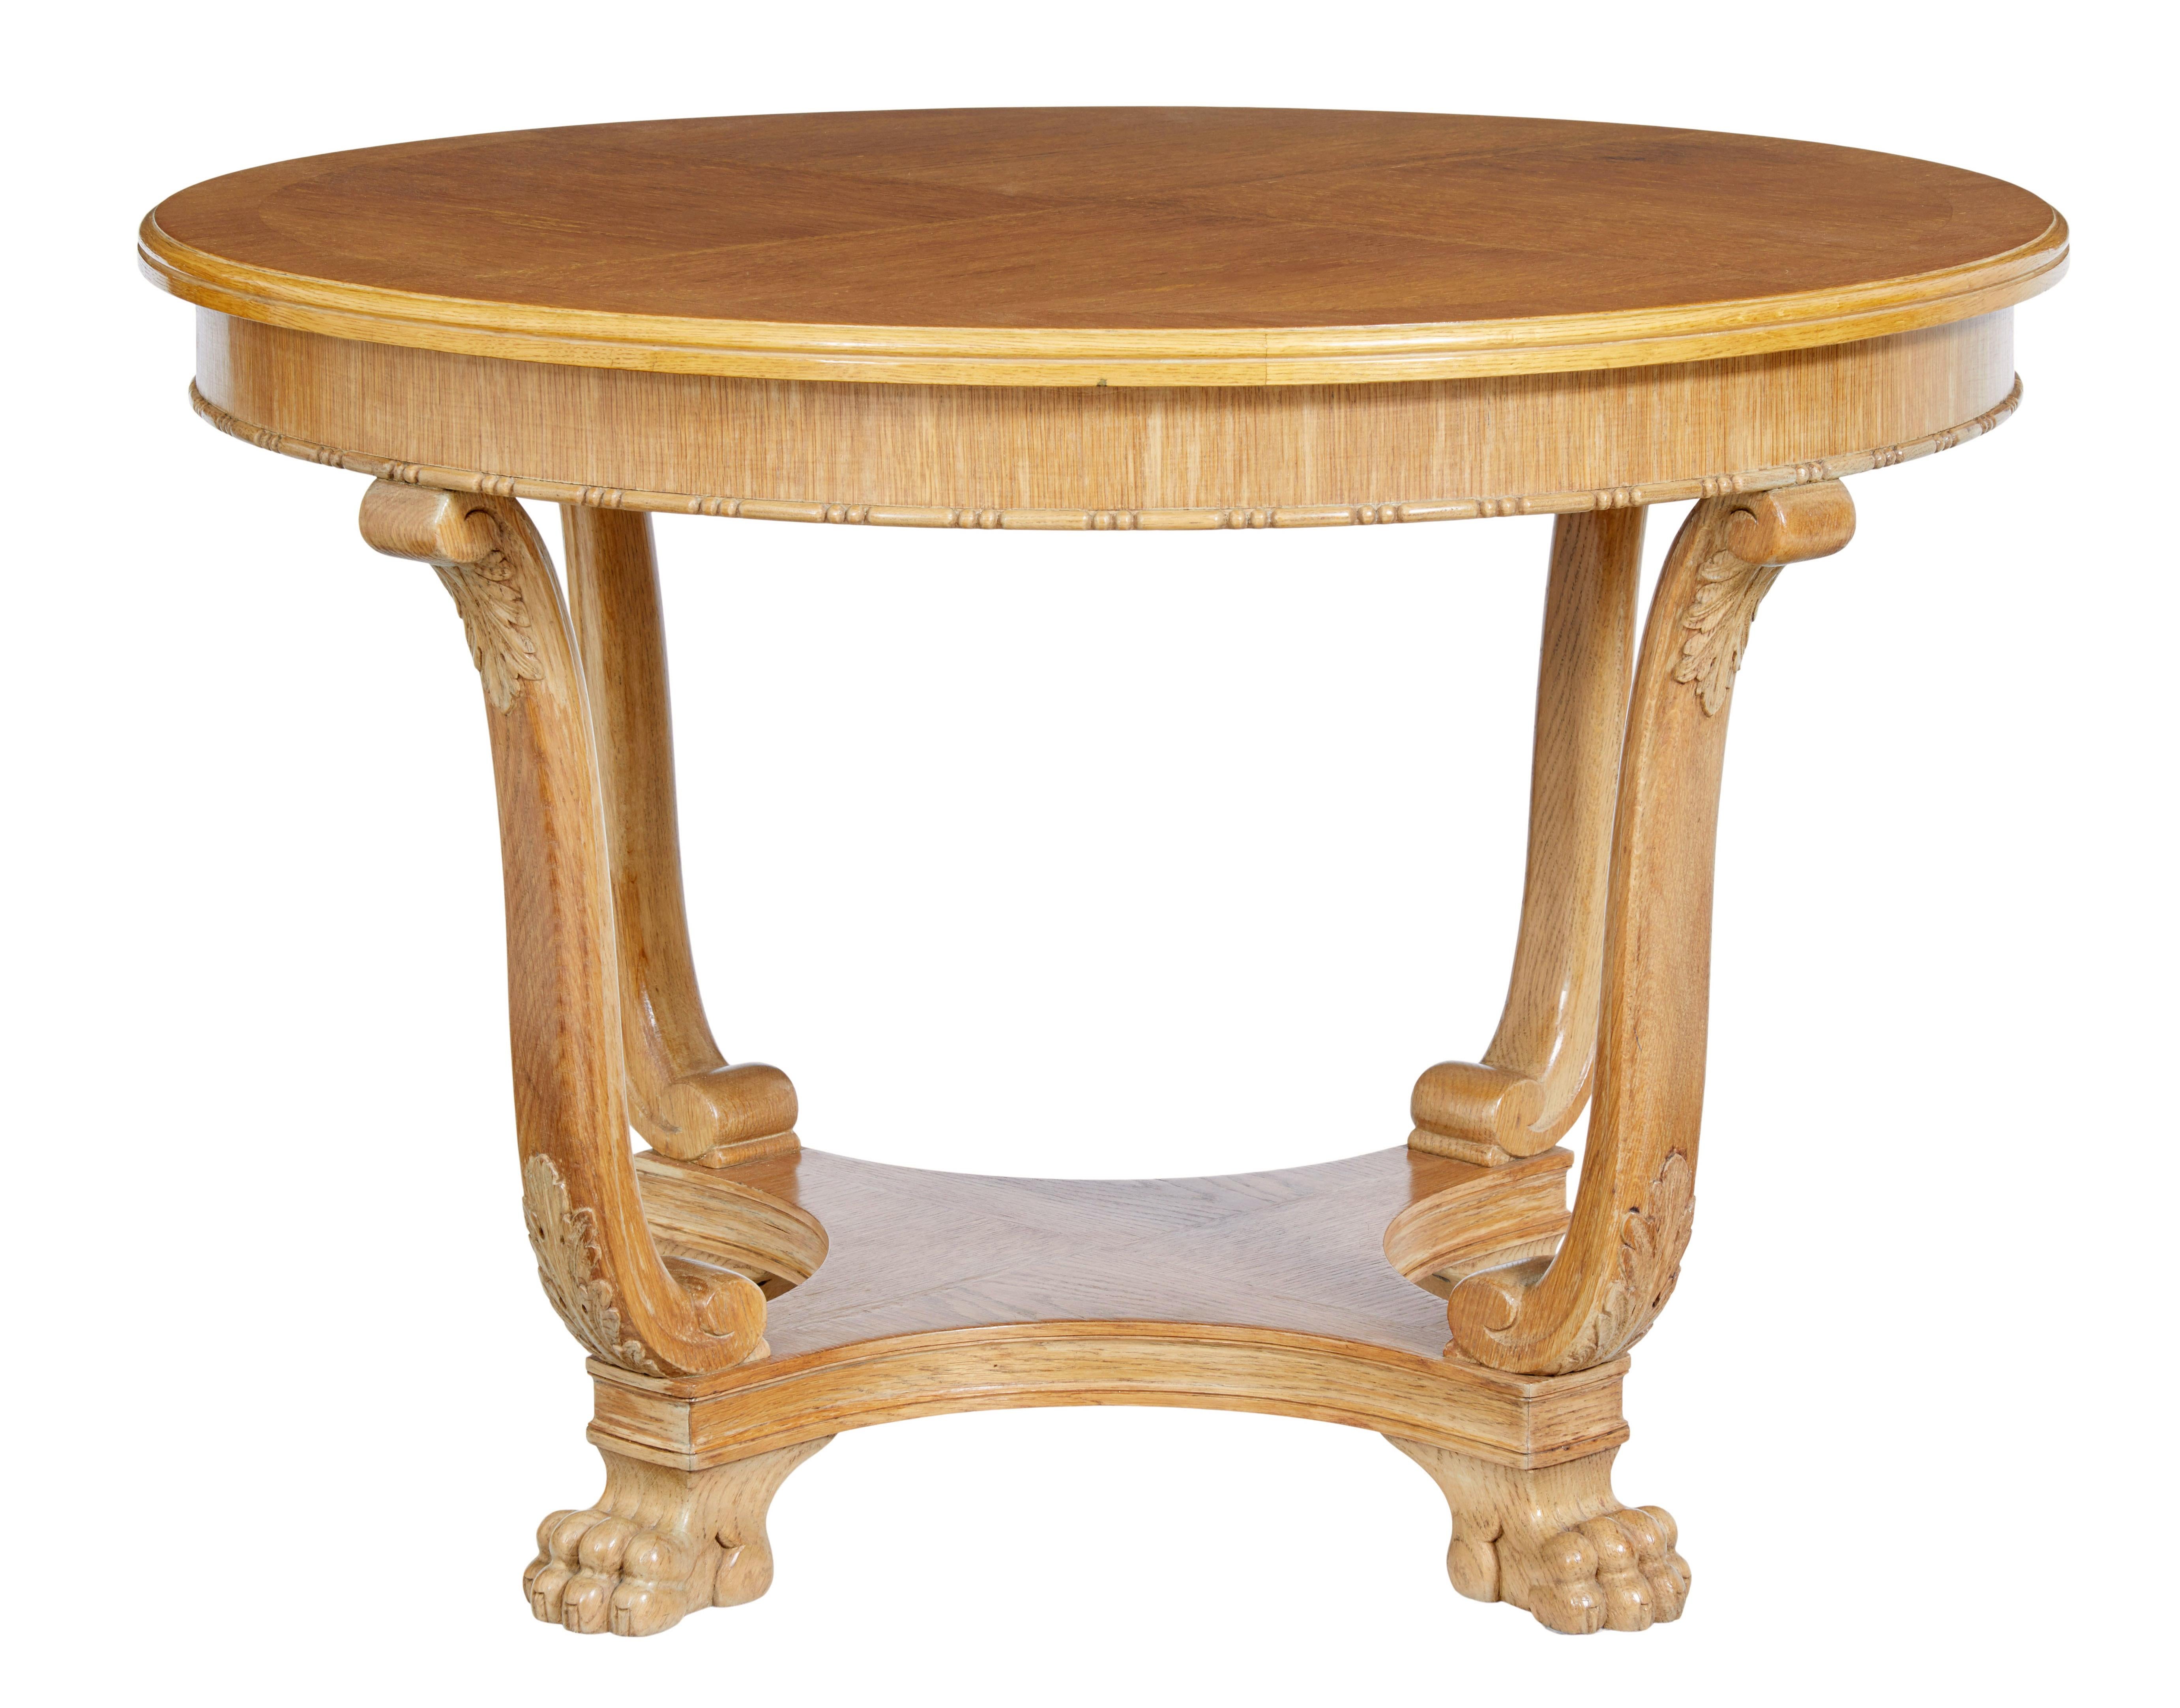 Mid-20th century oak coffee occasional table circa 1940.

Circular top which is quarter veneered and cross banded, with beaded detailing to the freize.  Supported by 4 scrolling legs with carved acanthus leaves. Shaped lower tier which stands on